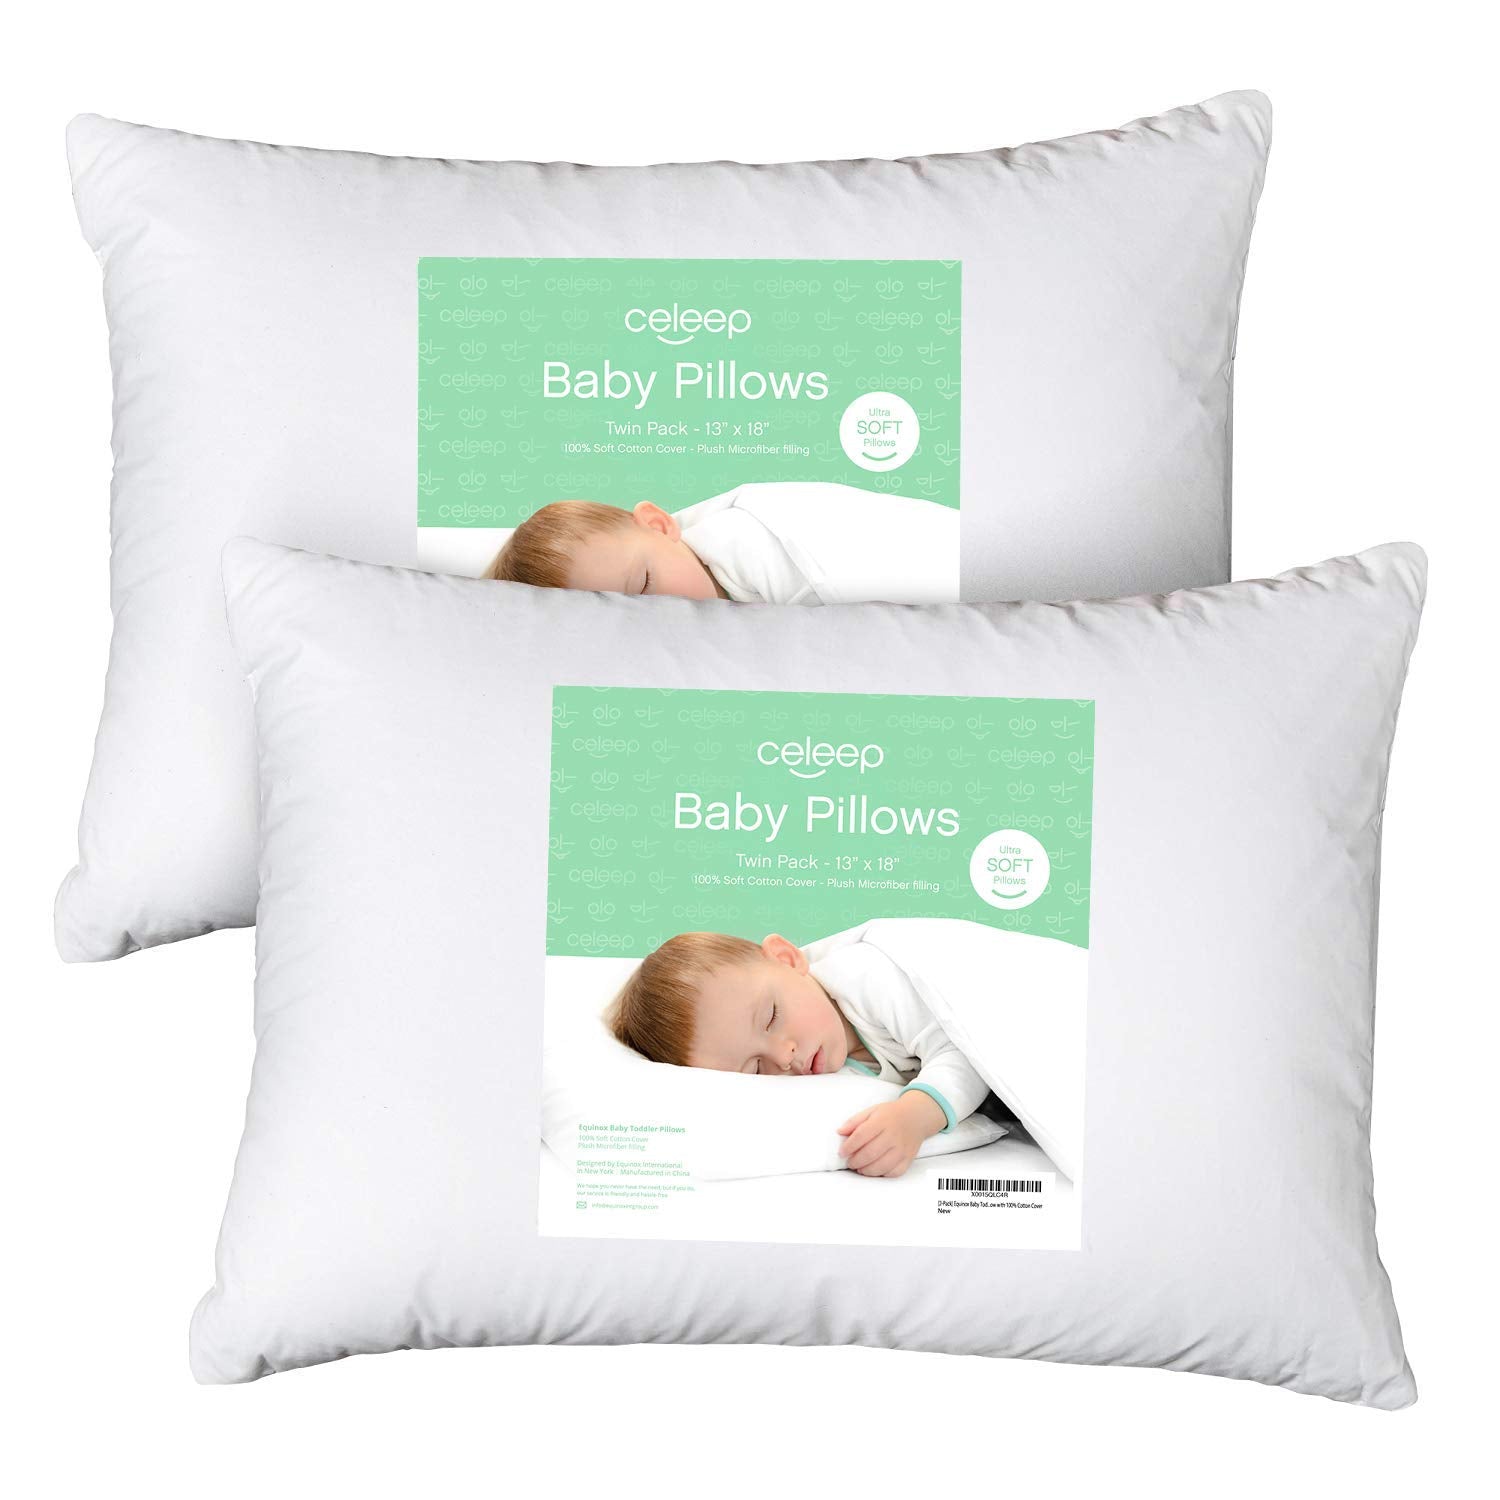 Baby pillow set for sale